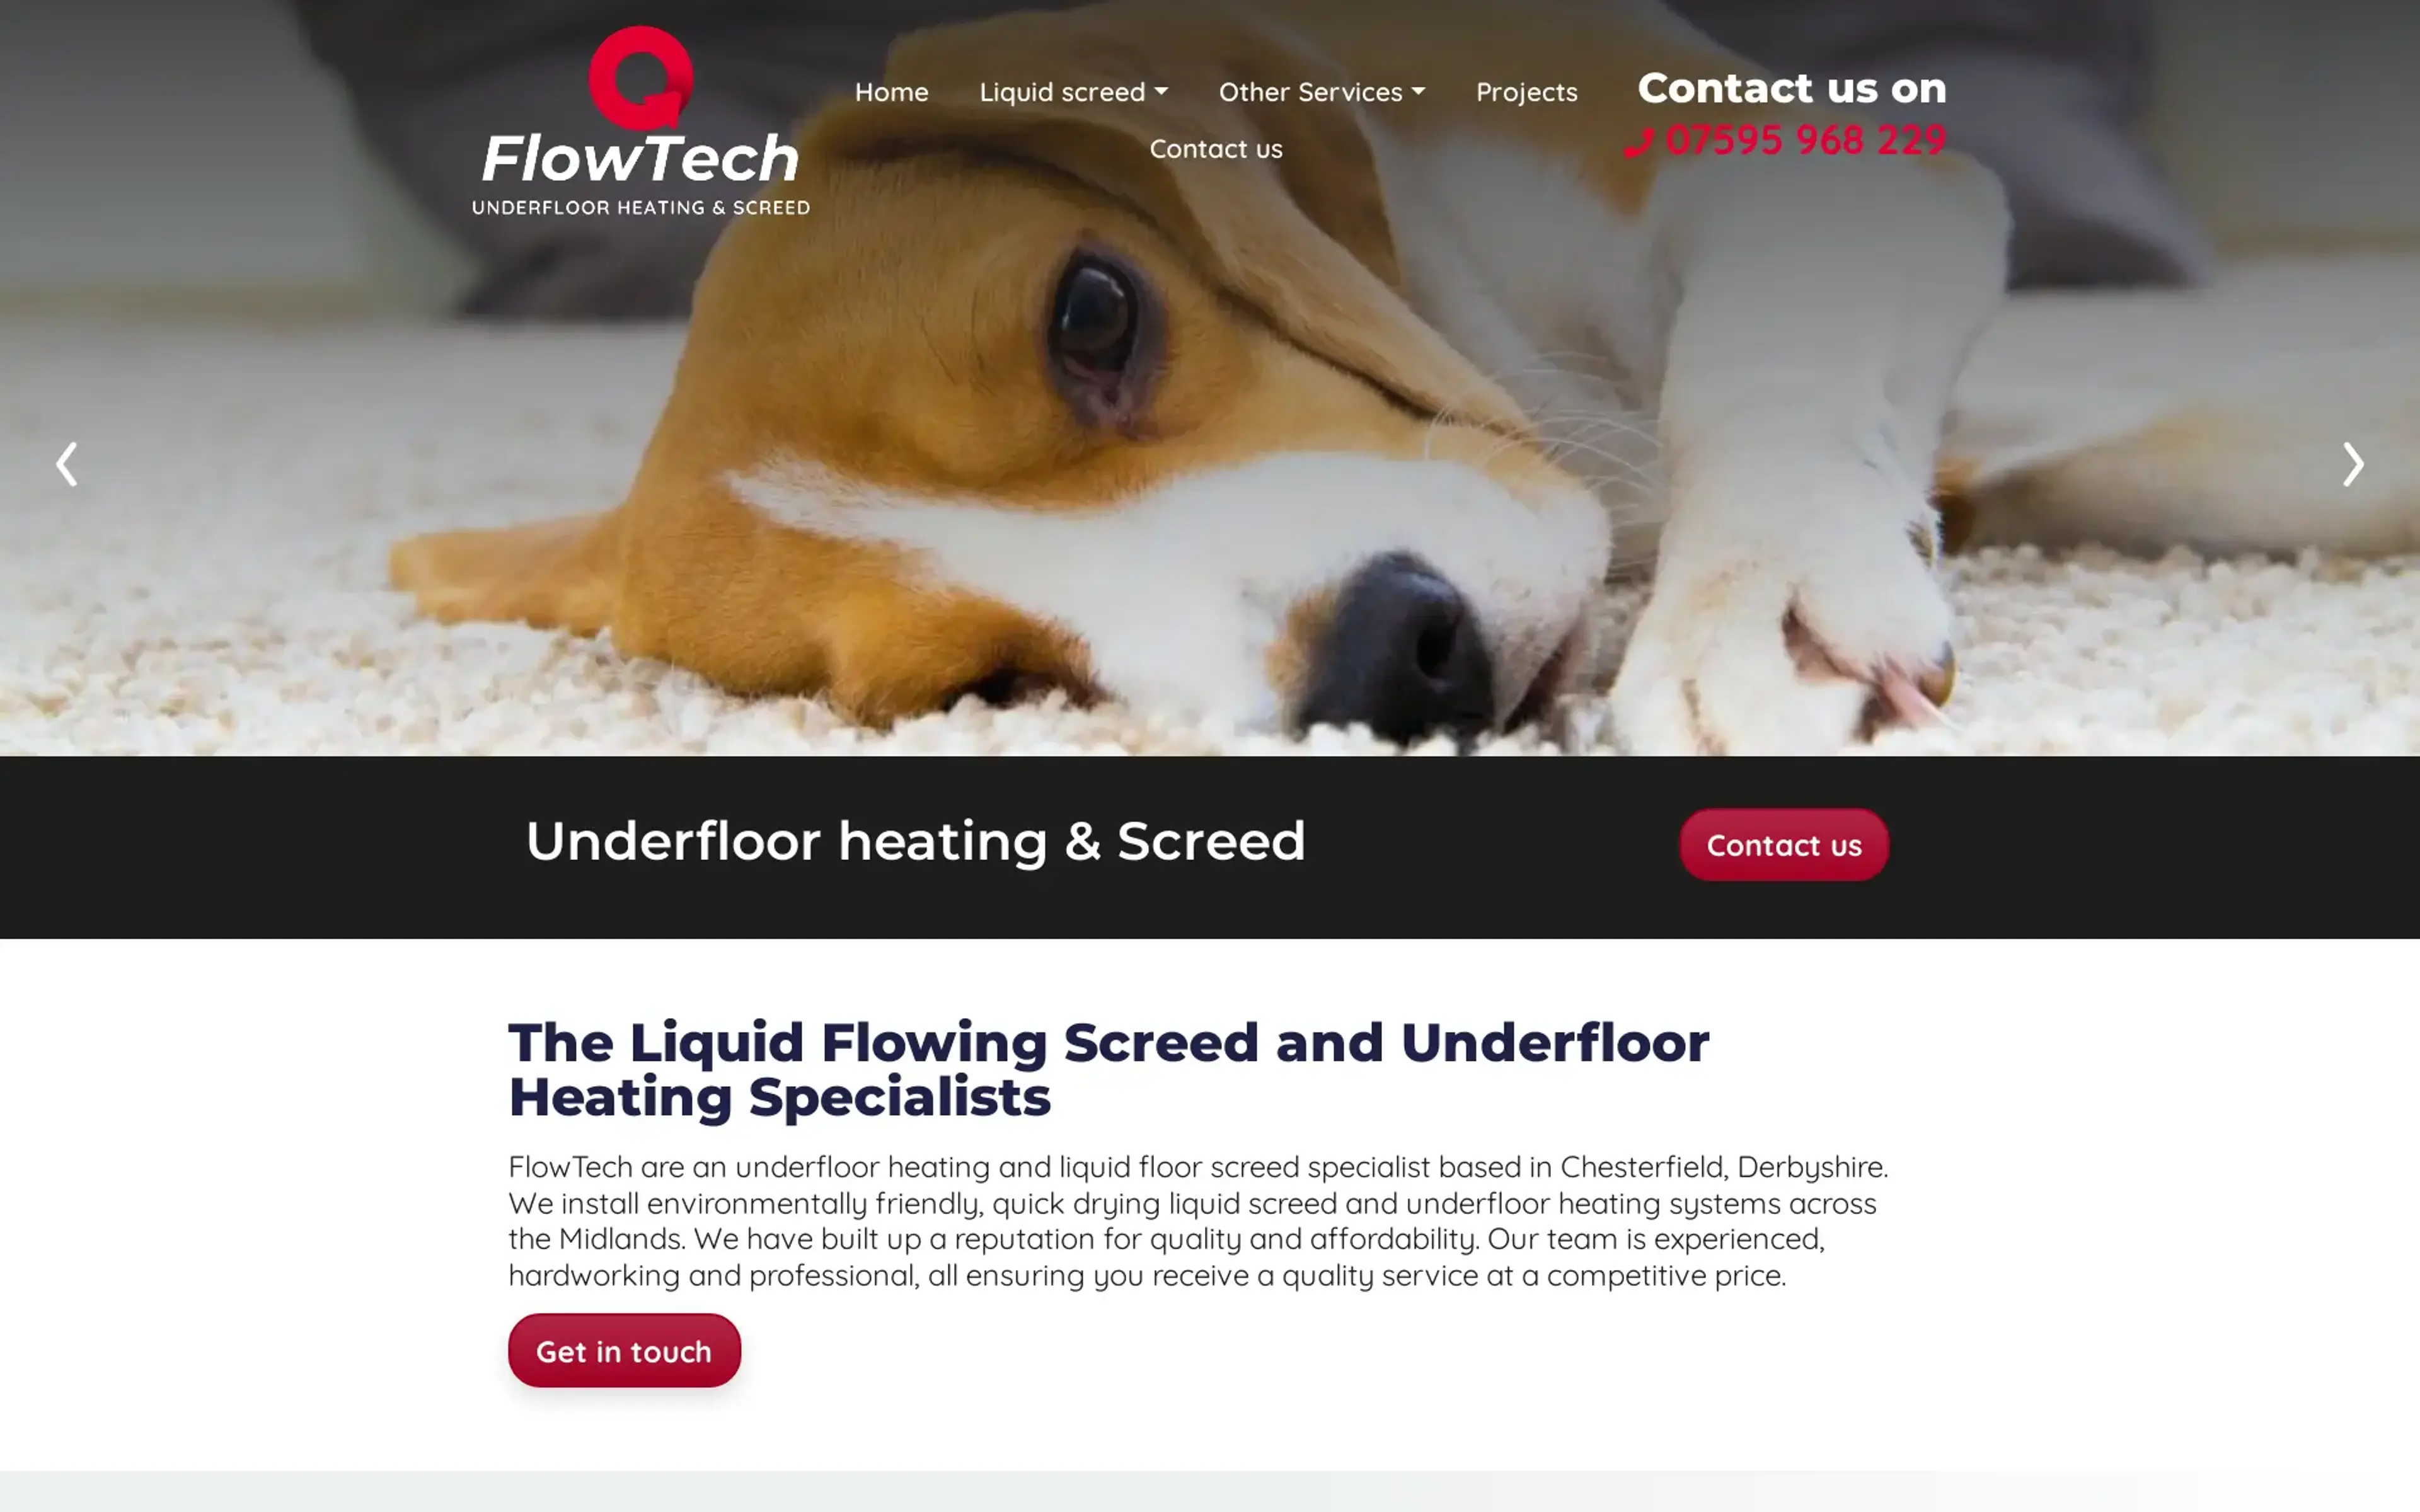 Recent project we worked on for Flowtech